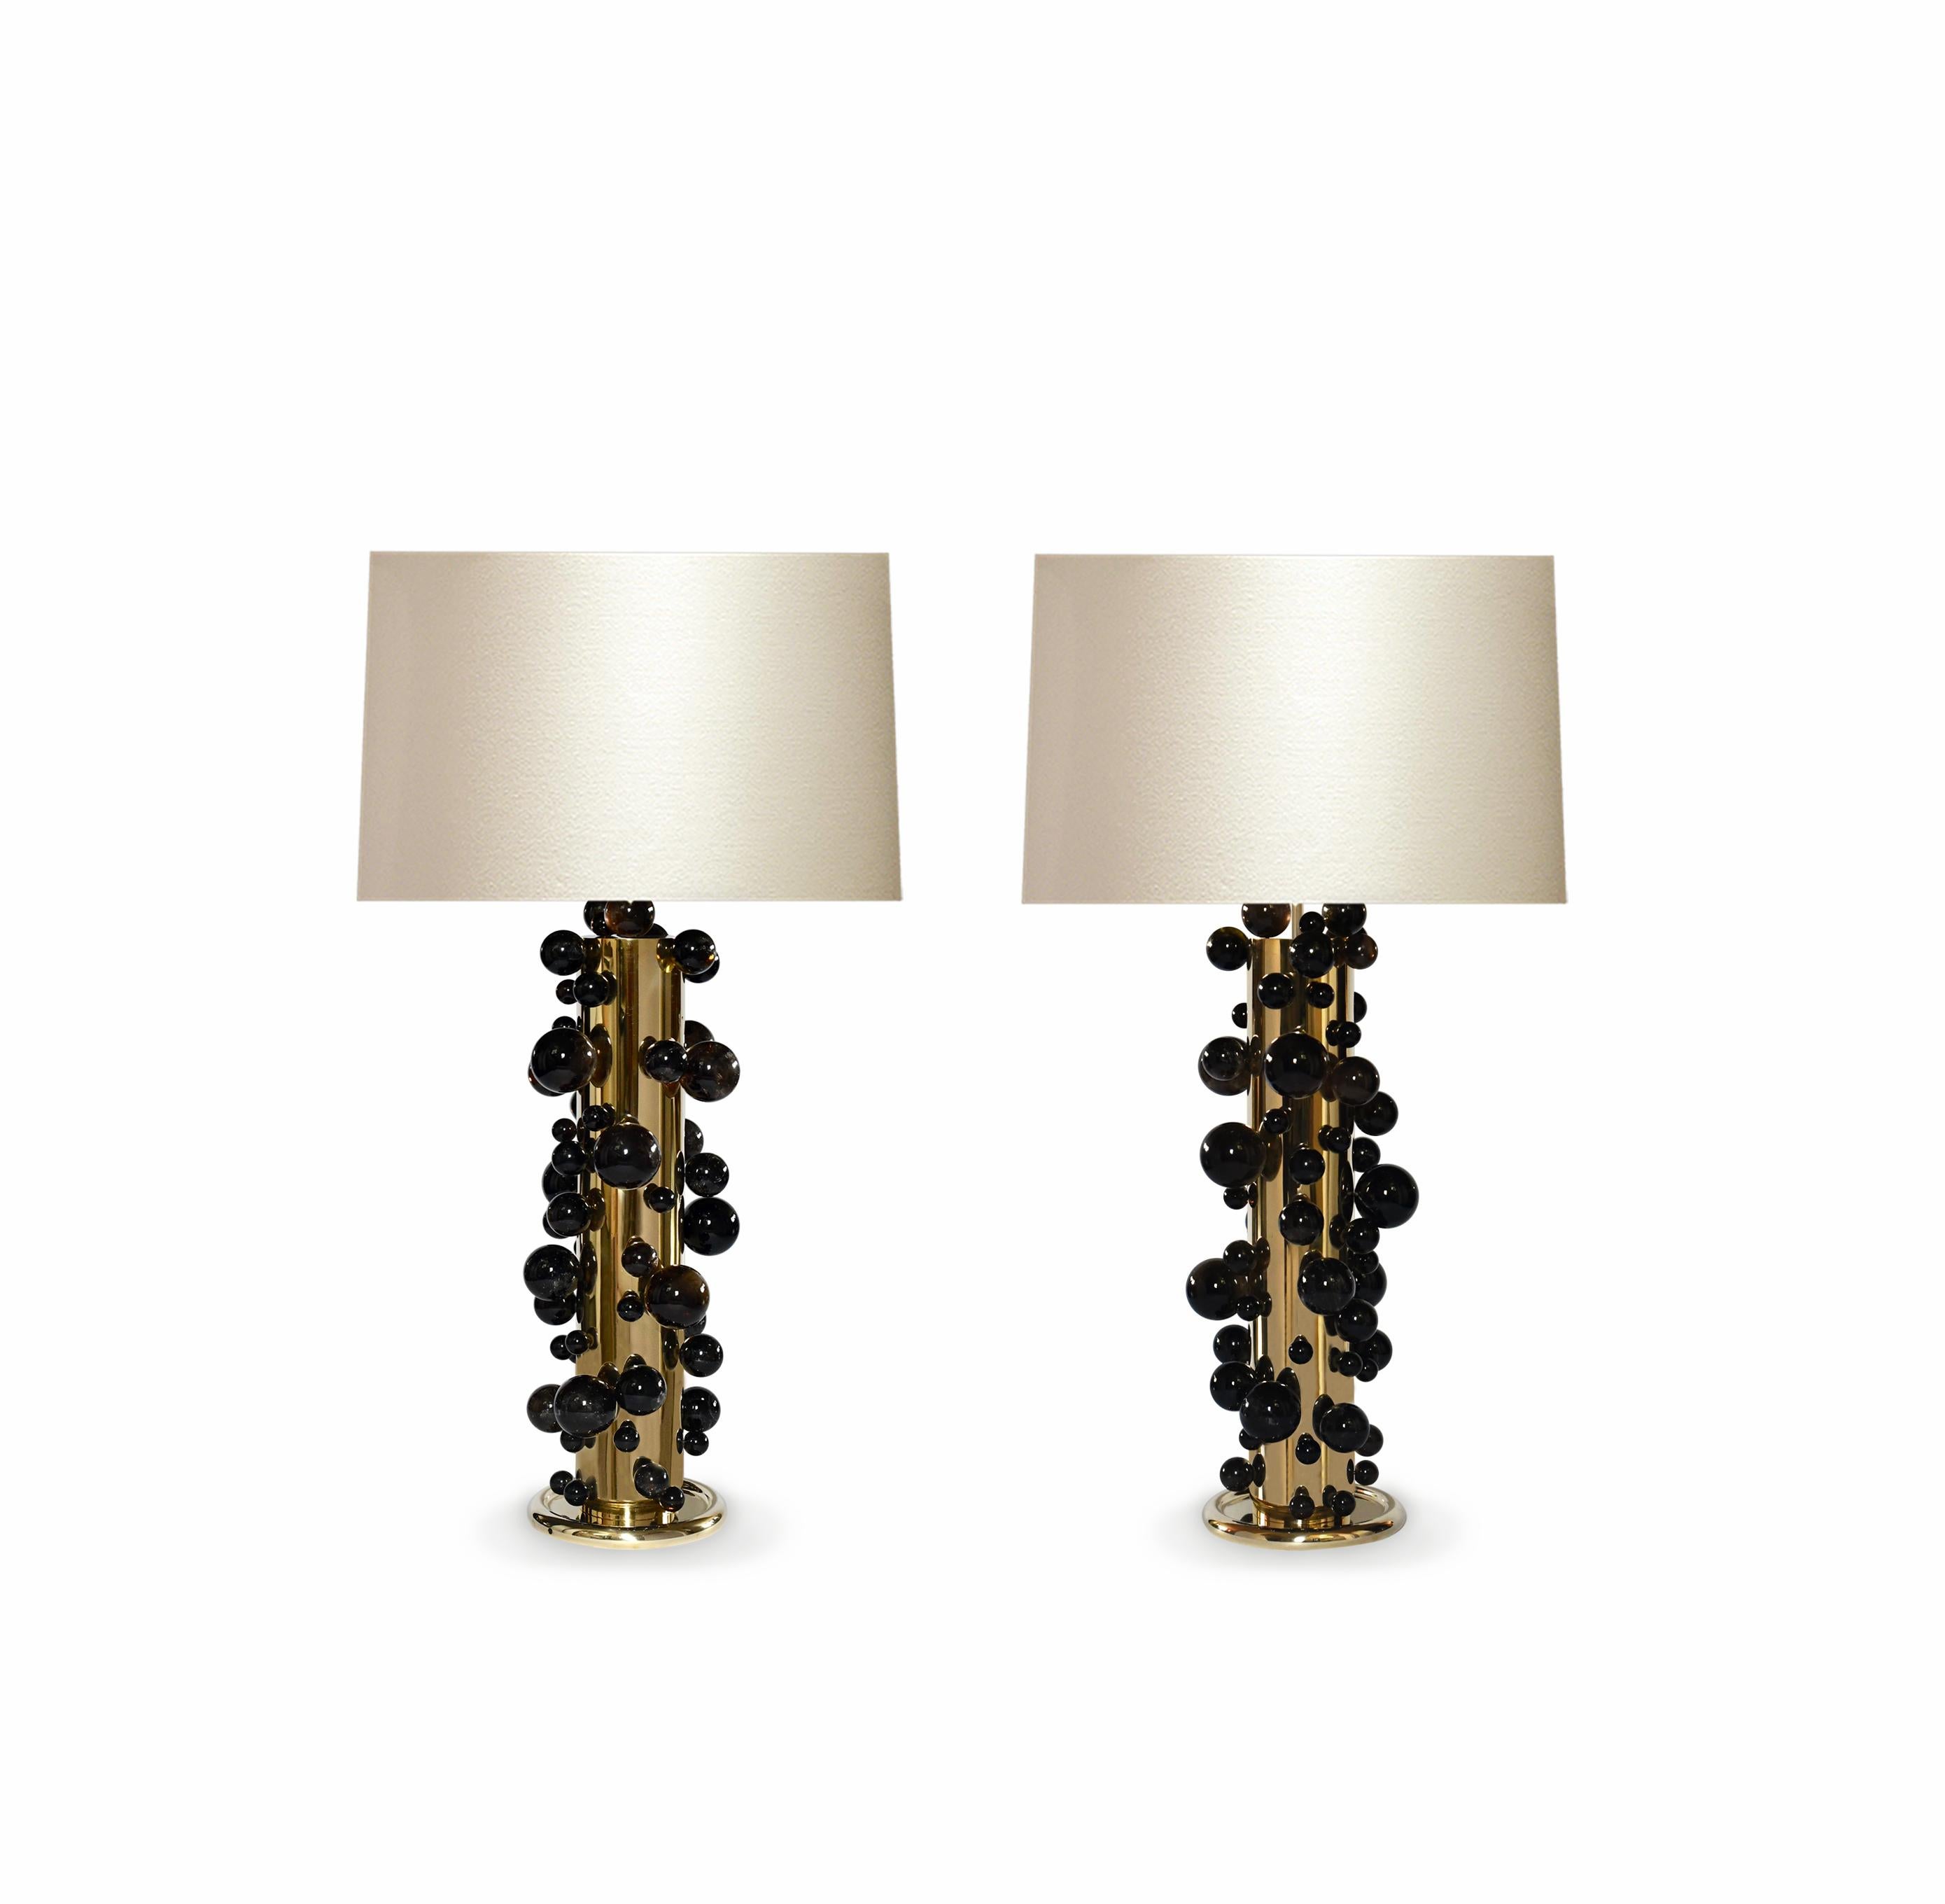 A tall pair of luxury dark rock crystal quartz bubble lamps with polish brass frames. Created by Phoenix Gallery, NYC.
Each lamp installed two sockets.
To the top of the rock crystal 25.75